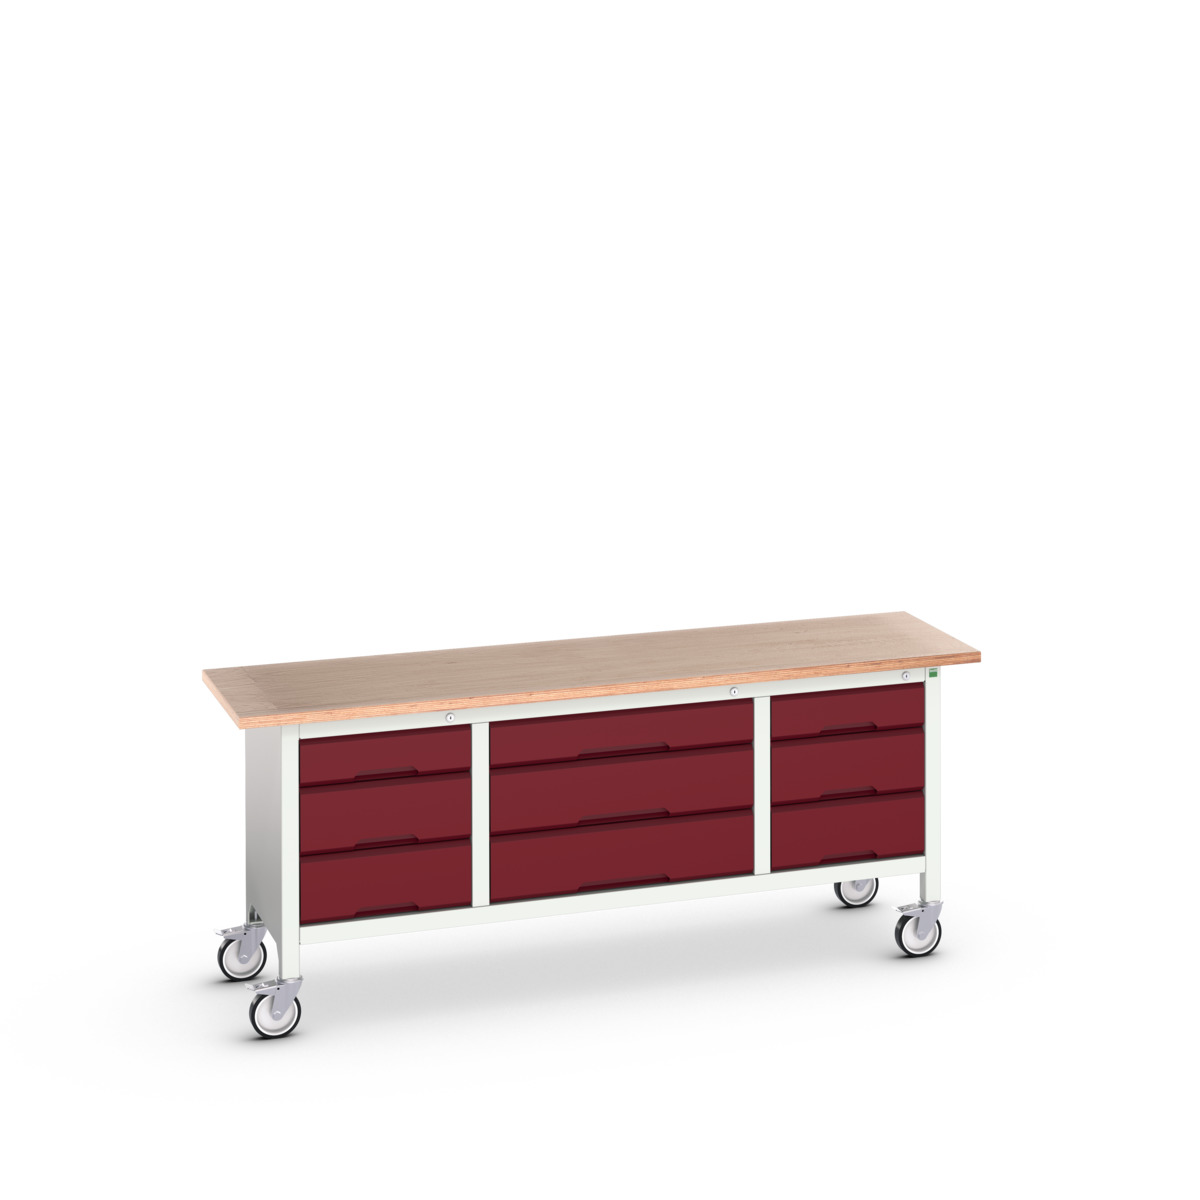 16923233.24 - verso mobile storage bench (mpx)